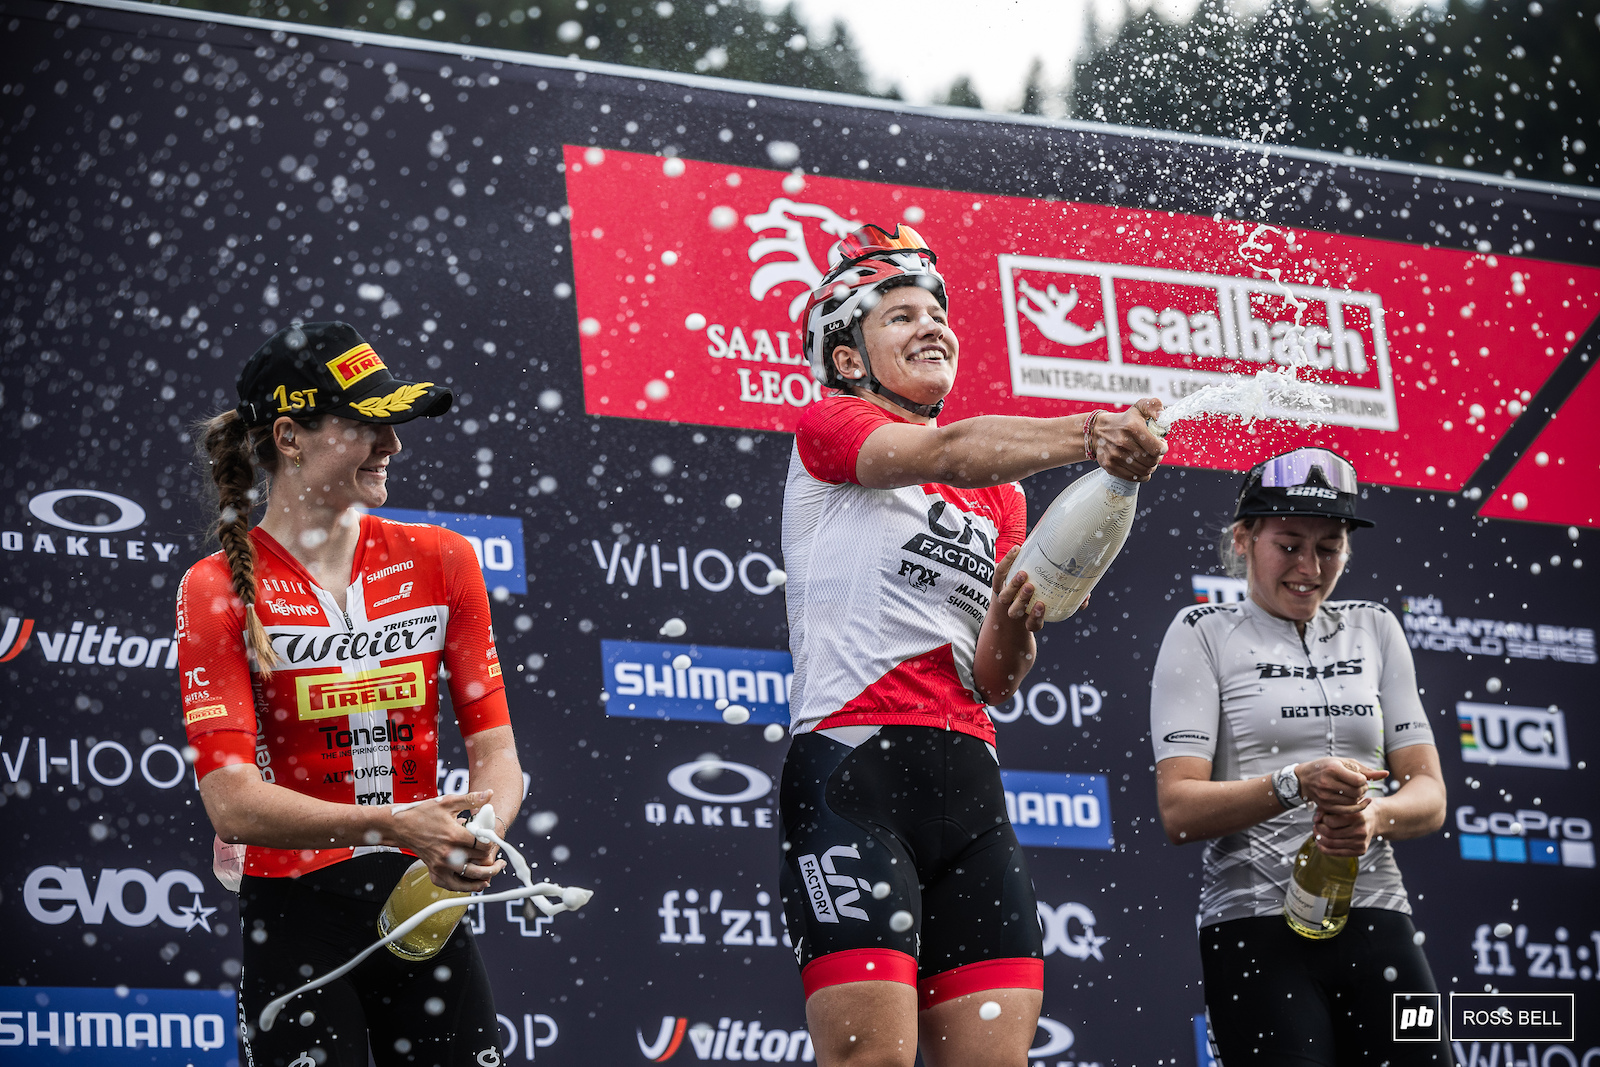 A familiar feeling for Ronja Bl chlinger who is getting used to spraying the U23 XCC champagne.